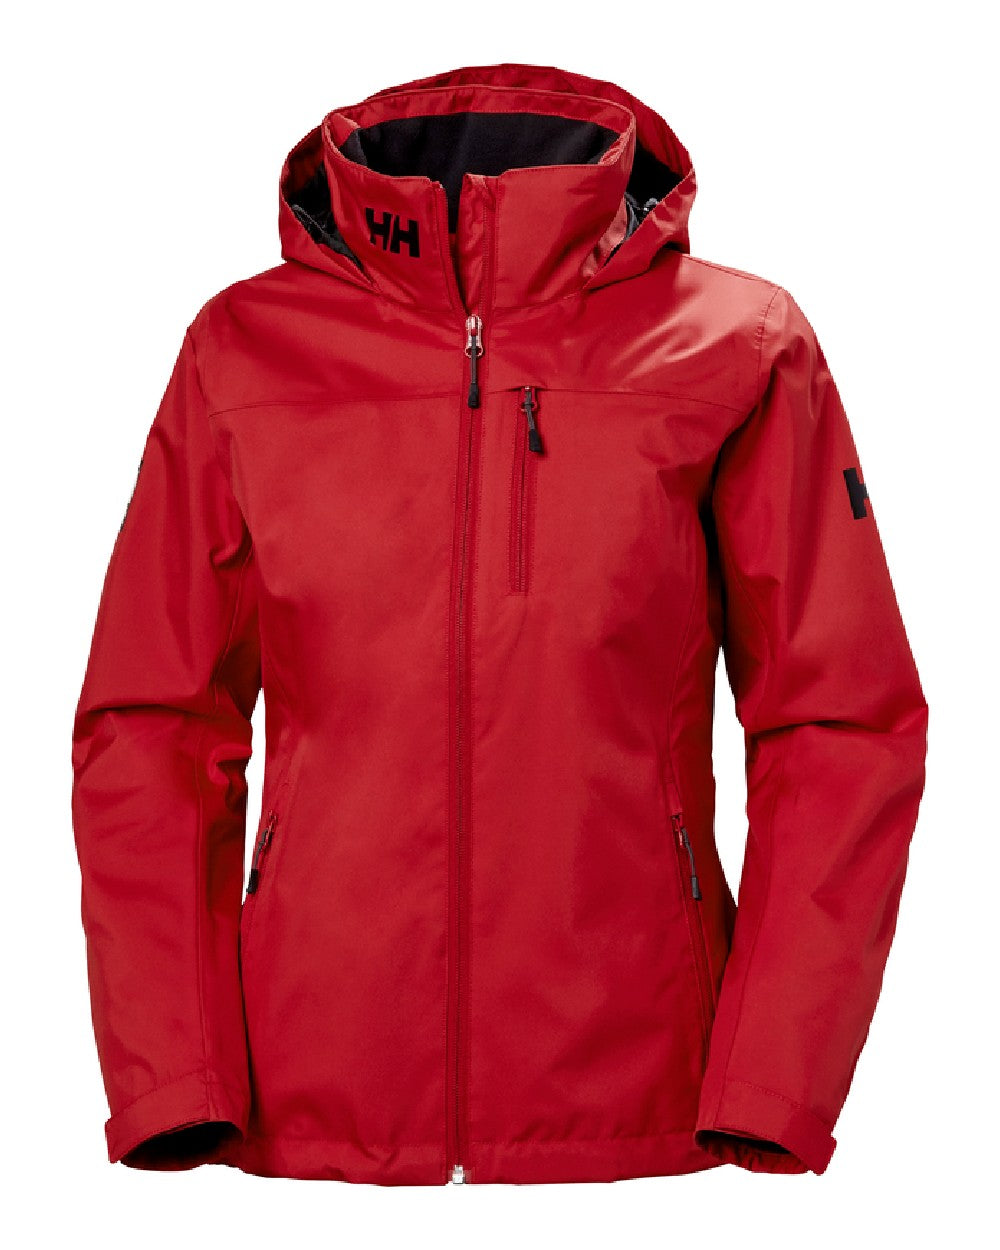 Helly Hansen Womens Crew Hooded Midlayer Jacket in Red 